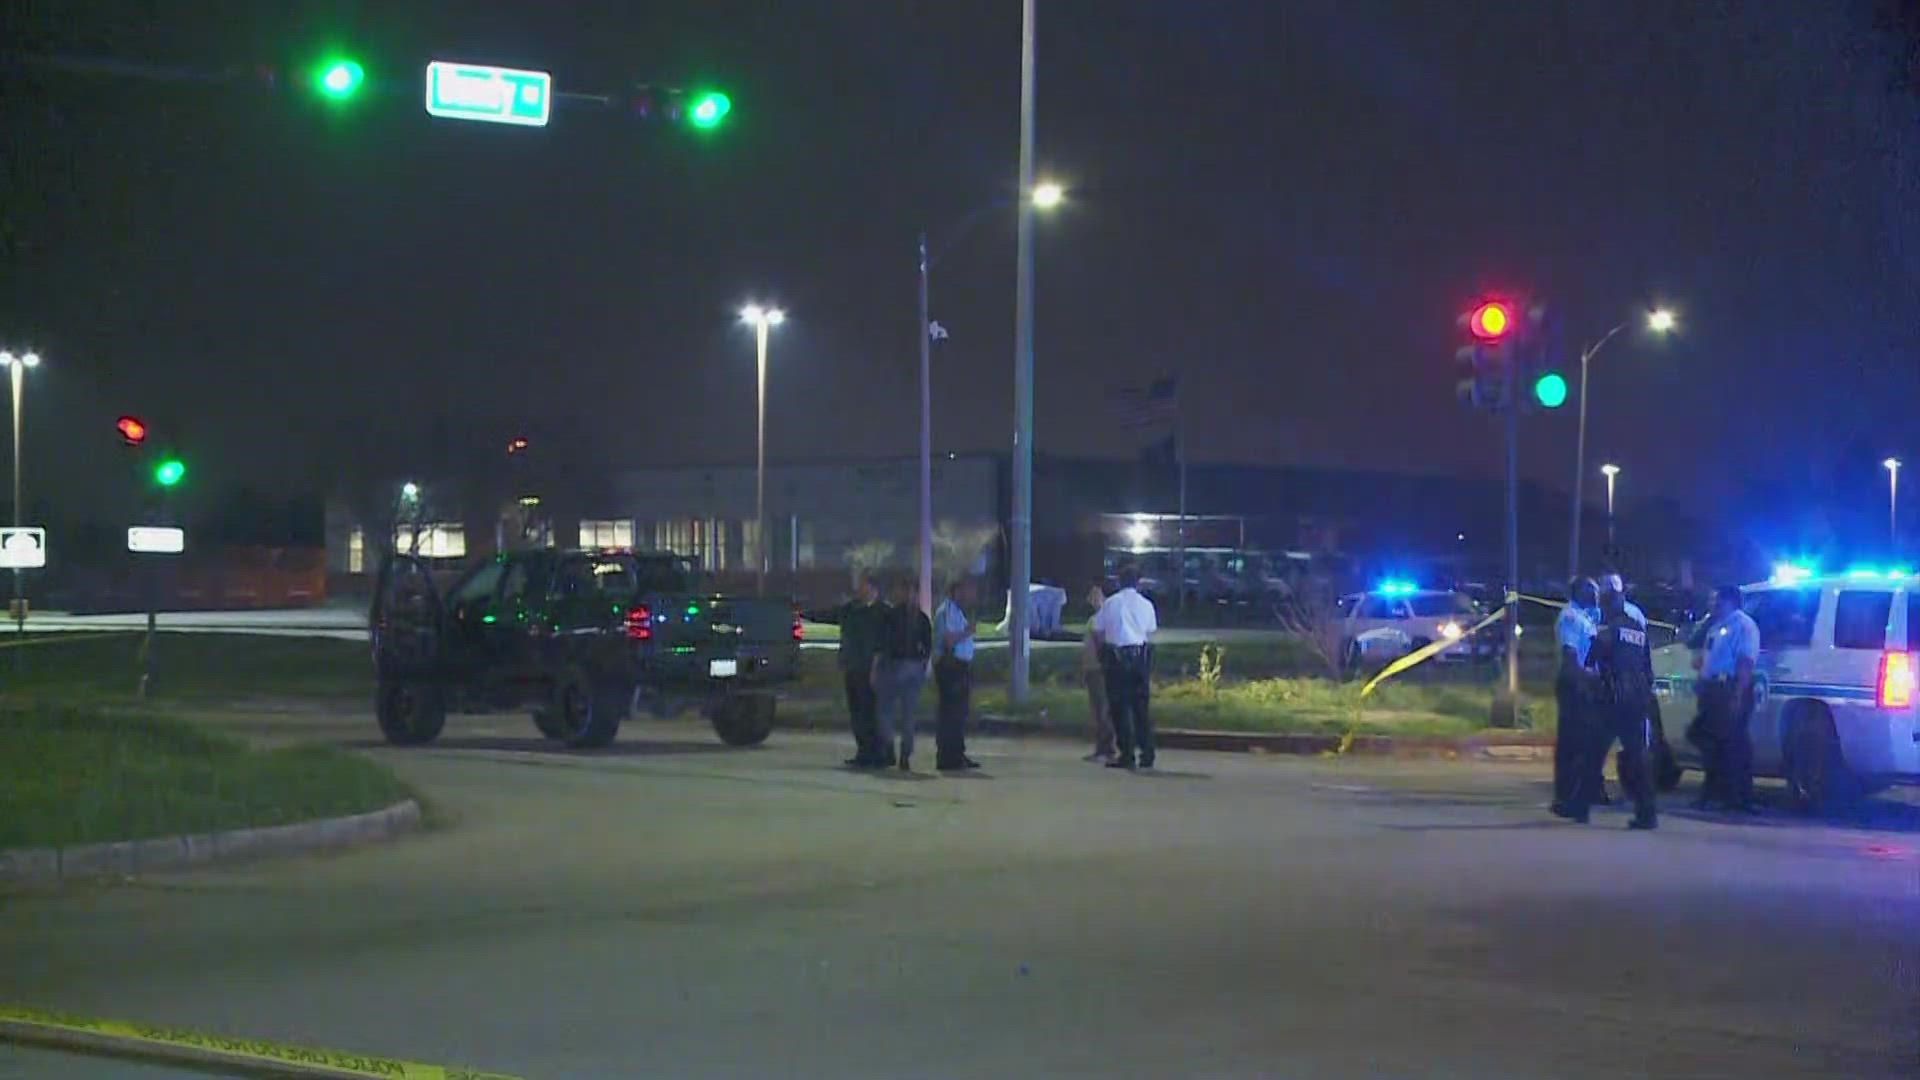 A man was shot multiple times and died, according to the New Orleans Police department.